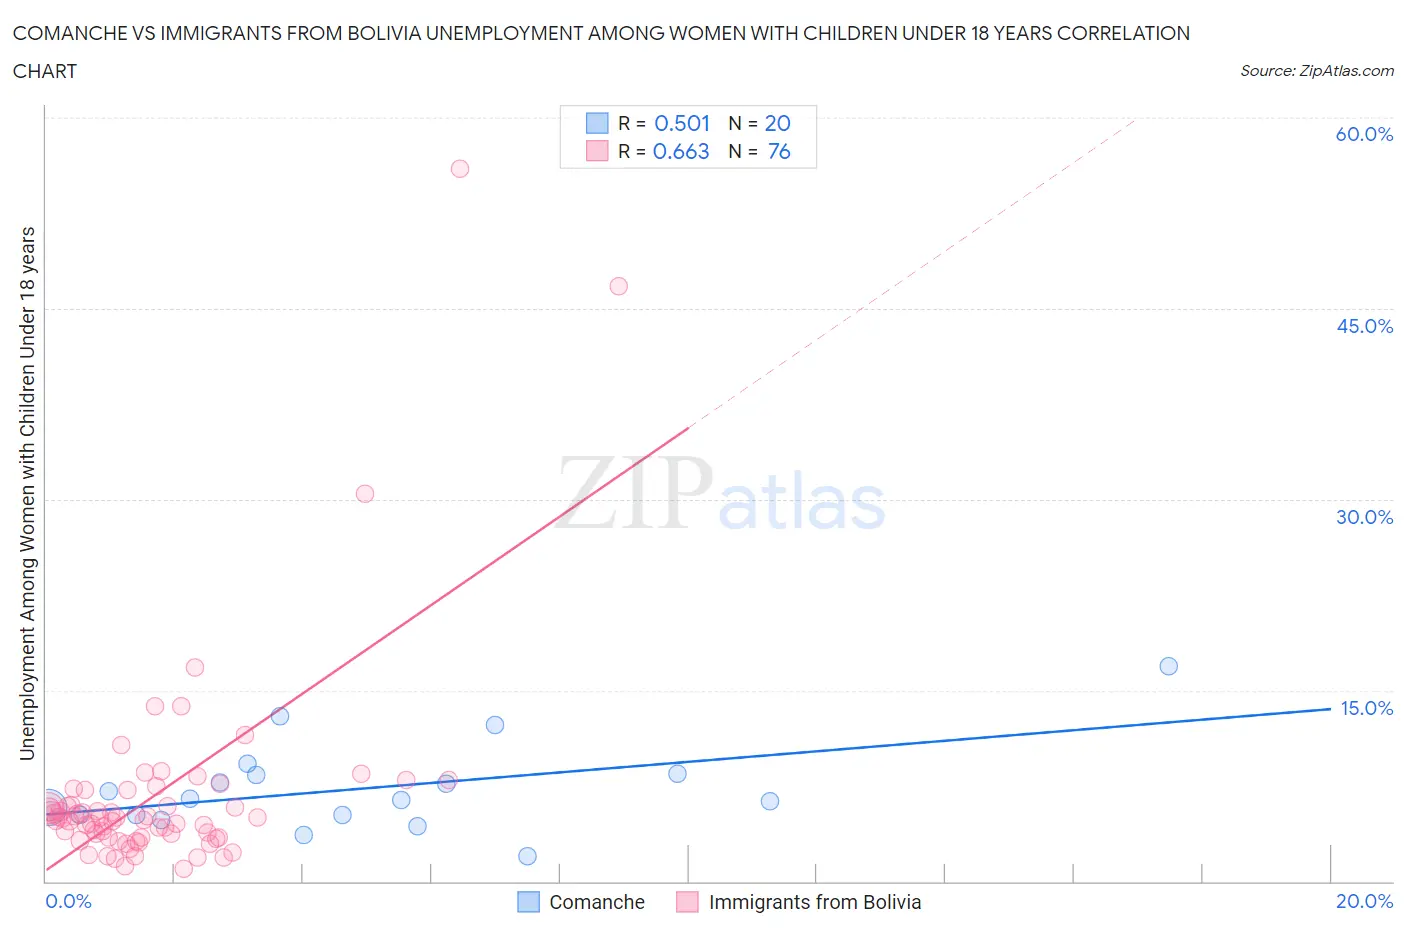 Comanche vs Immigrants from Bolivia Unemployment Among Women with Children Under 18 years